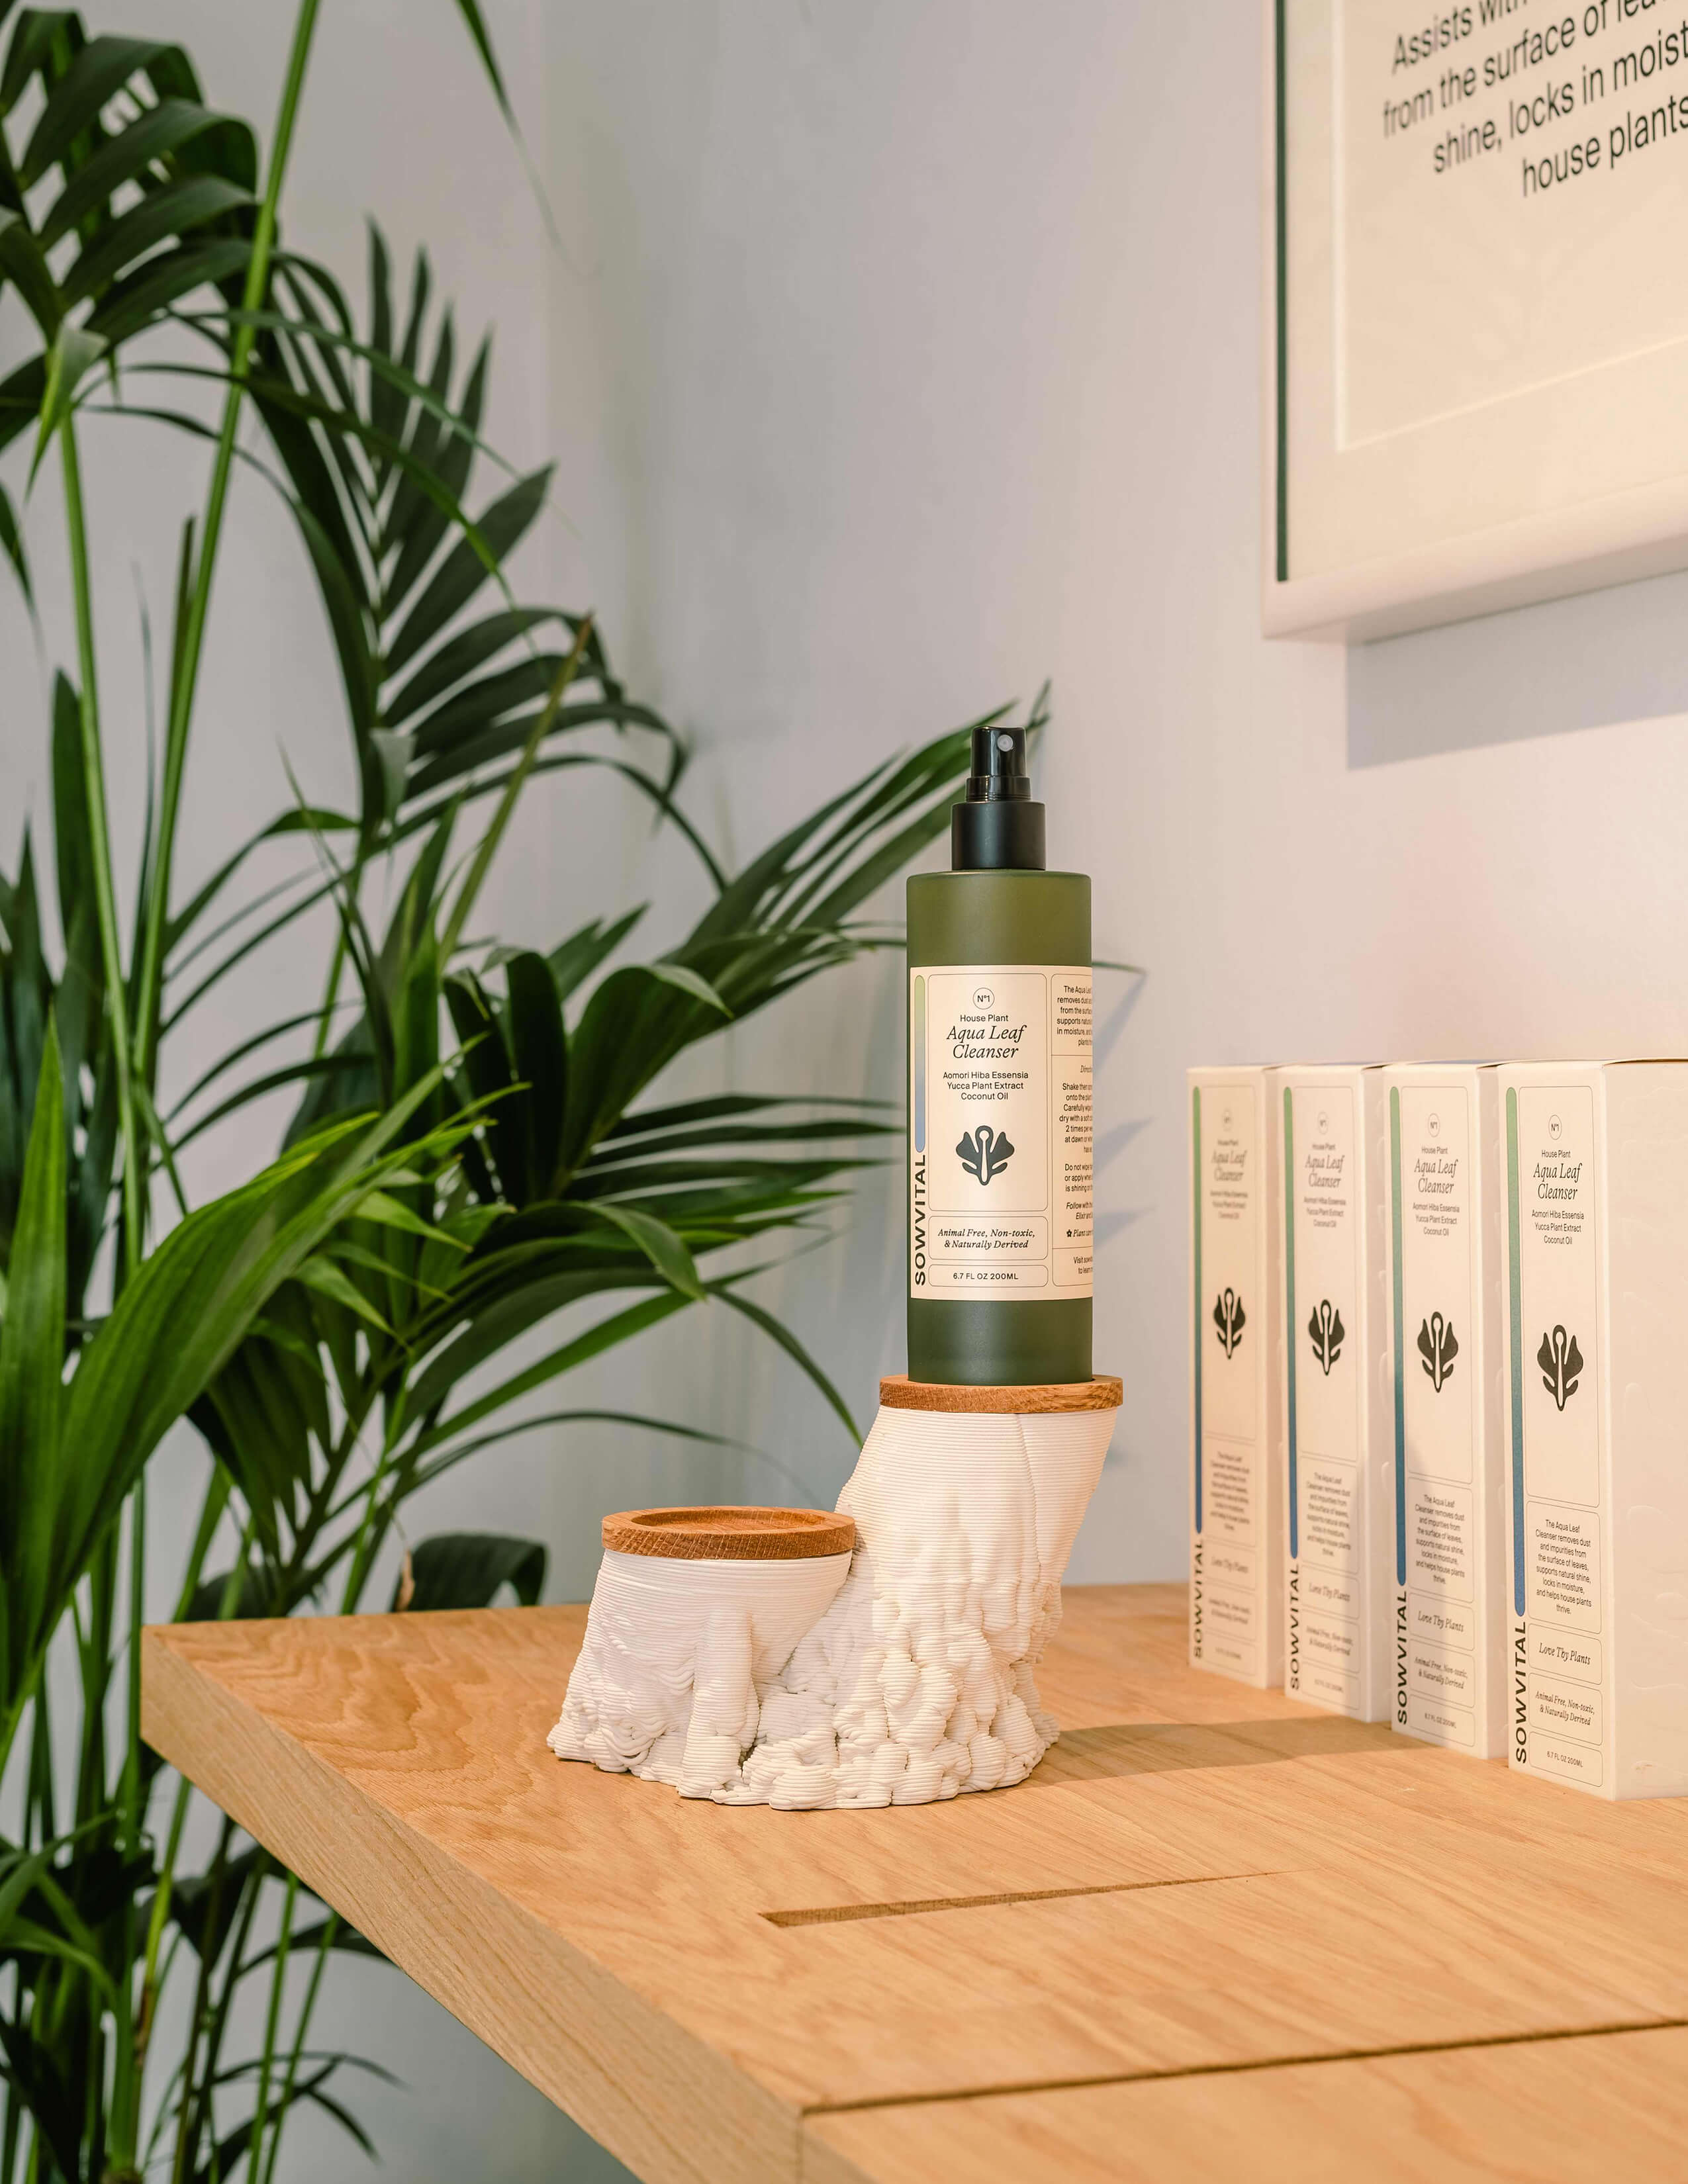 A photograph different angle of the Sowvital product - Aqua leaf cleanser, is presented on the 3D printed ceramics and the packaging behind it.